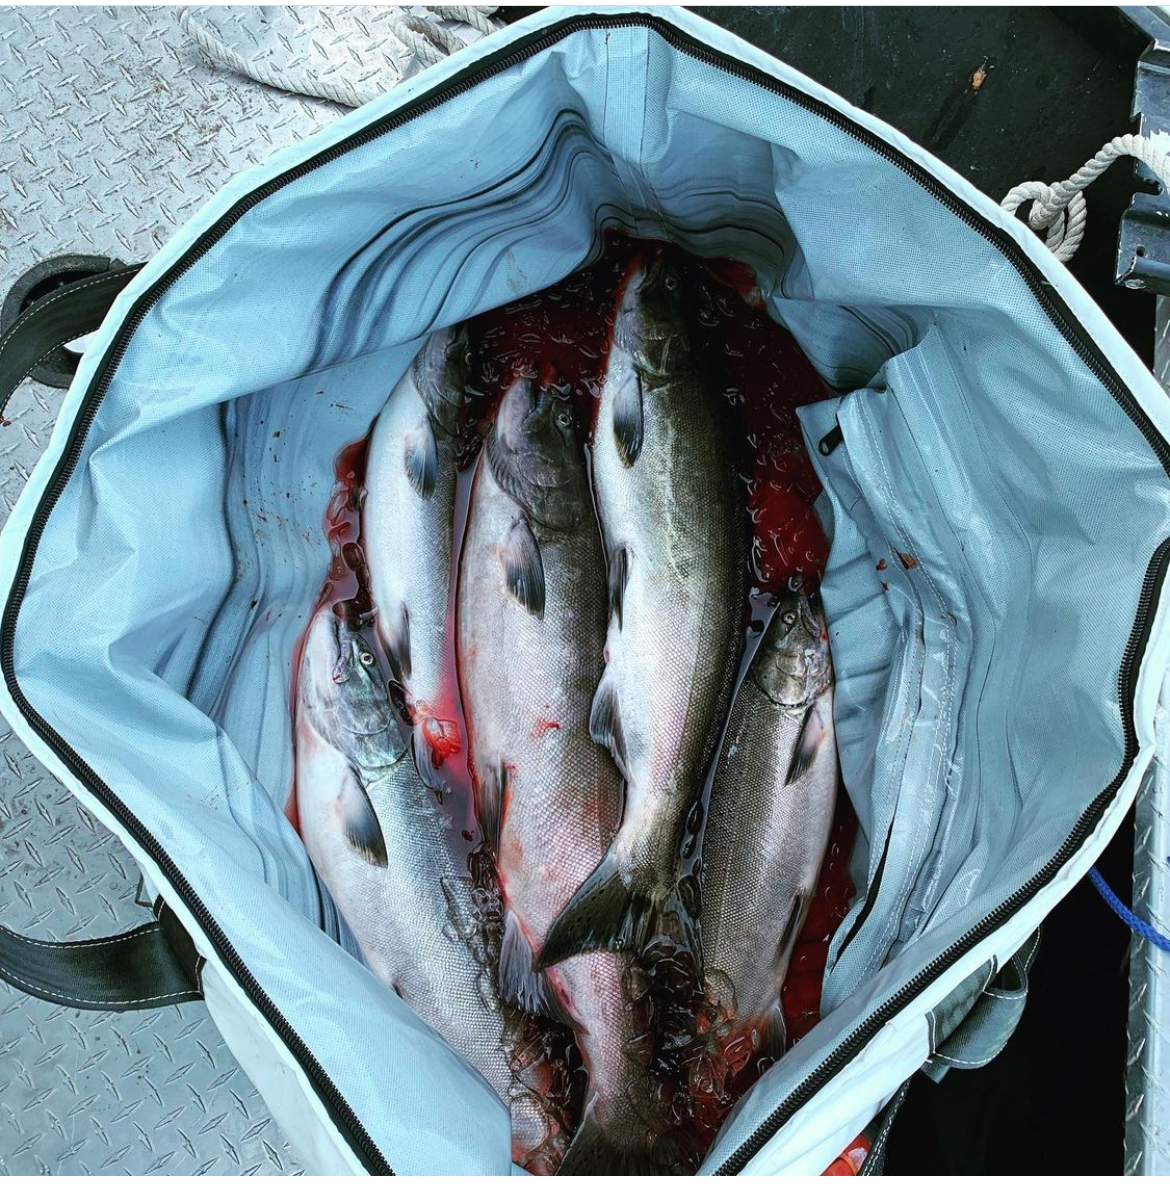 Opah Fish Kill Bag / Soft Sided Cooler - On going Review - Fishing -   Discussion forum